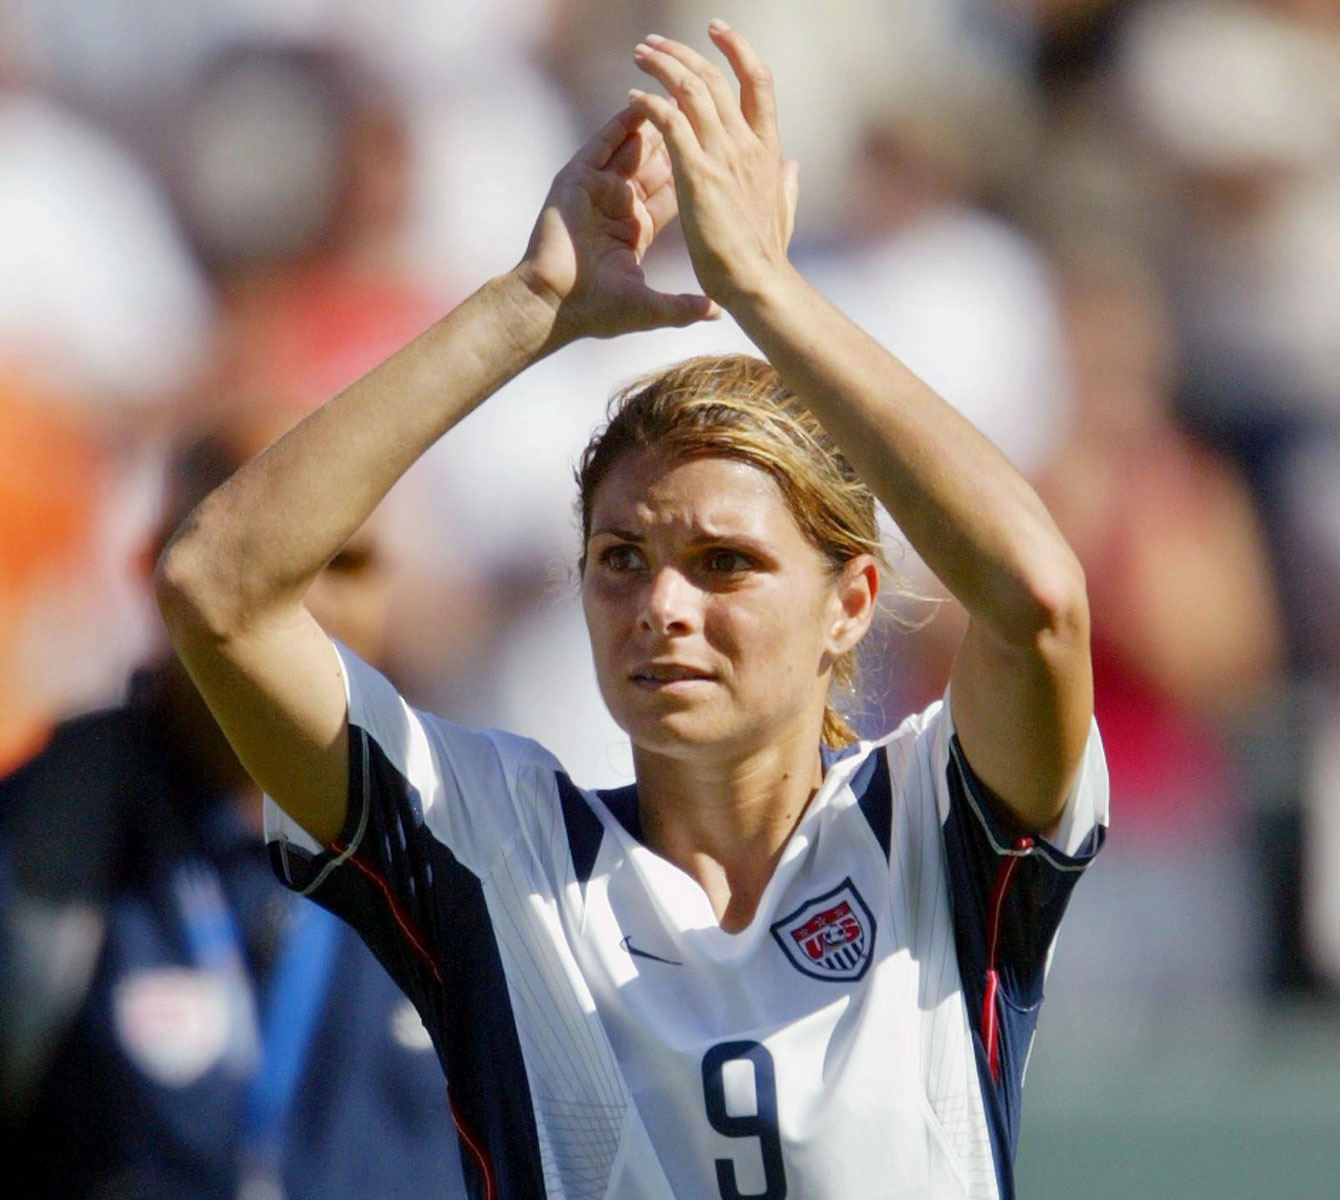 Mia Hamm applauds the crowd after the third place match at the FIFA Women's World Cup on October 11, 2003. USA beat Canada 3-1, in a match where Christine Sinclair scored the Canadian goal. On December 13, 2015, Sinclair tied Hamm for all-time goals with 158. 